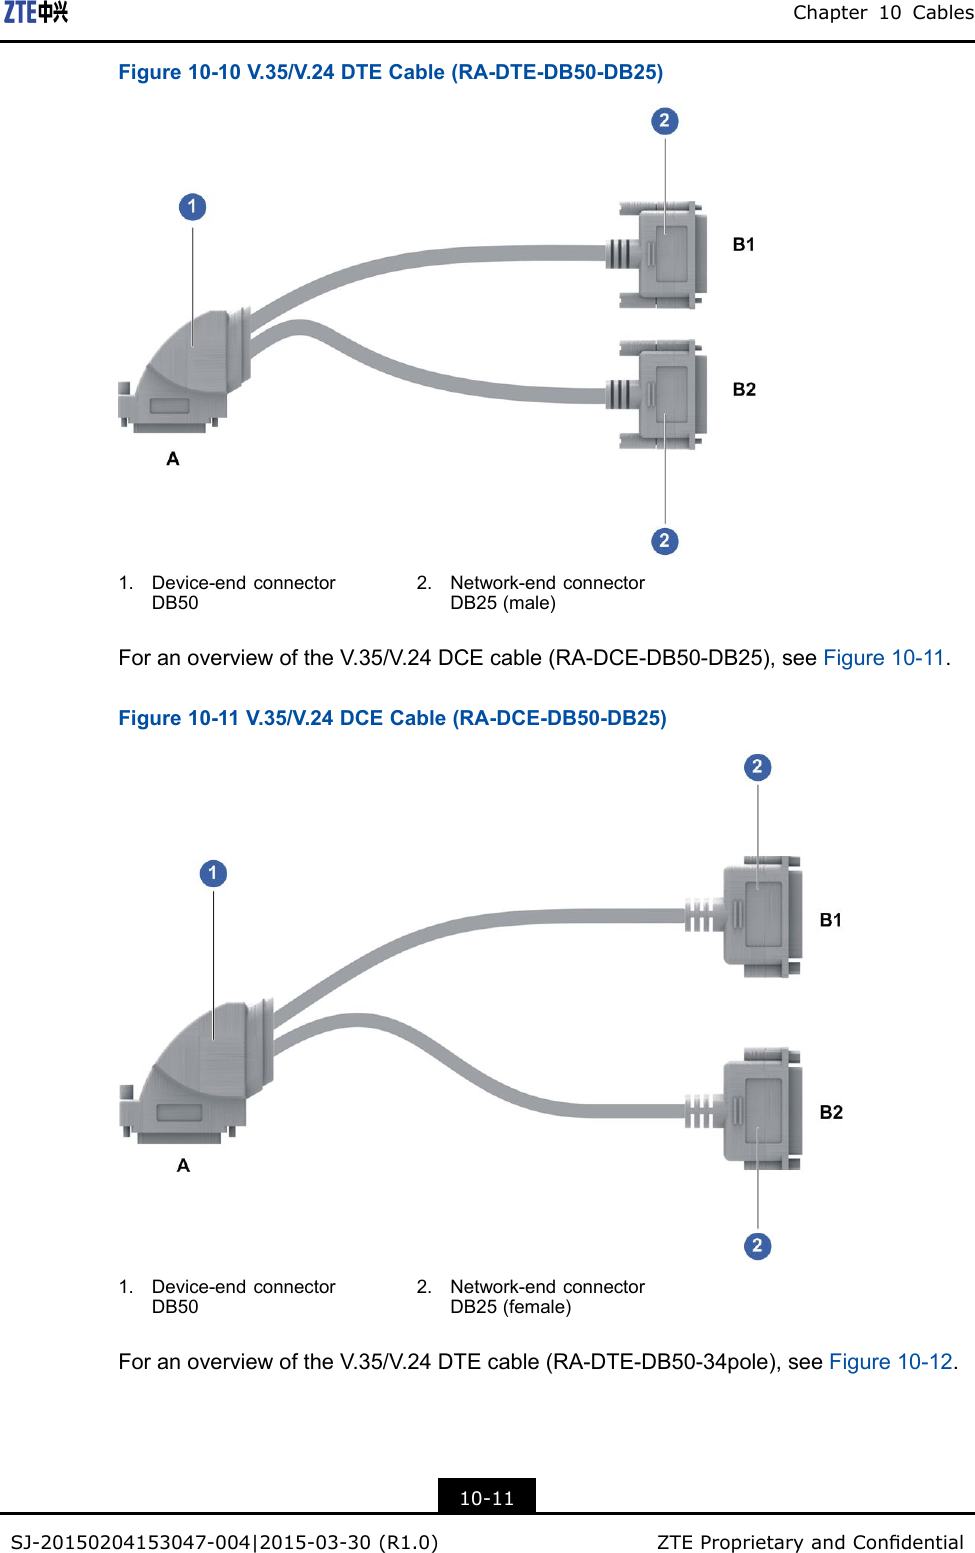 Chapter10CablesFigure10-10V.35/V.24DTECable(RA-DTE-DB50-DB25)1.Device-endconnectorDB502.Network-endconnectorDB25(male)ForanoverviewoftheV.35/V.24DCEcable(RA-DCE-DB50-DB25),seeFigure10-11.Figure10-11V.35/V.24DCECable(RA-DCE-DB50-DB25)1.Device-endconnectorDB502.Network-endconnectorDB25(female)ForanoverviewoftheV.35/V.24DTEcable(RA-DTE-DB50-34pole),seeFigure10-12.10-11SJ-20150204153047-004|2015-03-30(R1.0)ZTEProprietaryandCondential